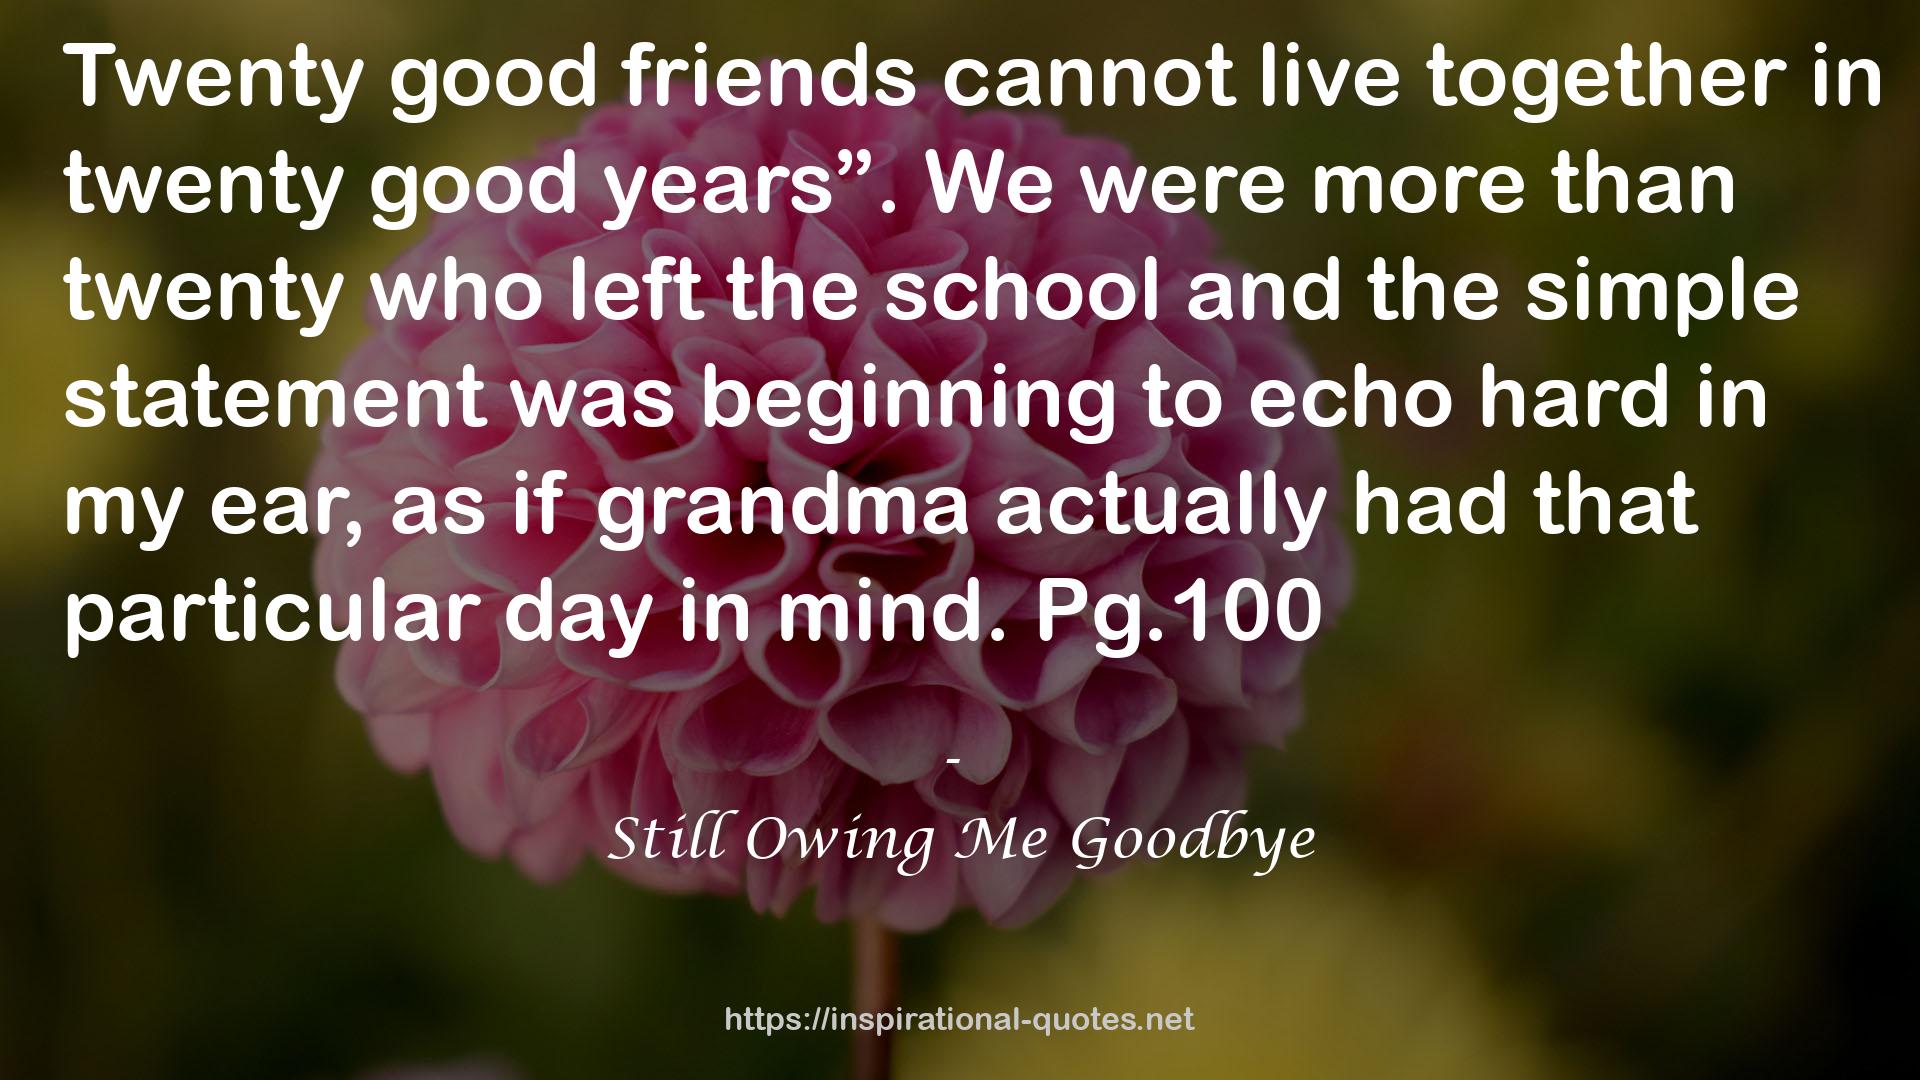 Still Owing Me Goodbye QUOTES